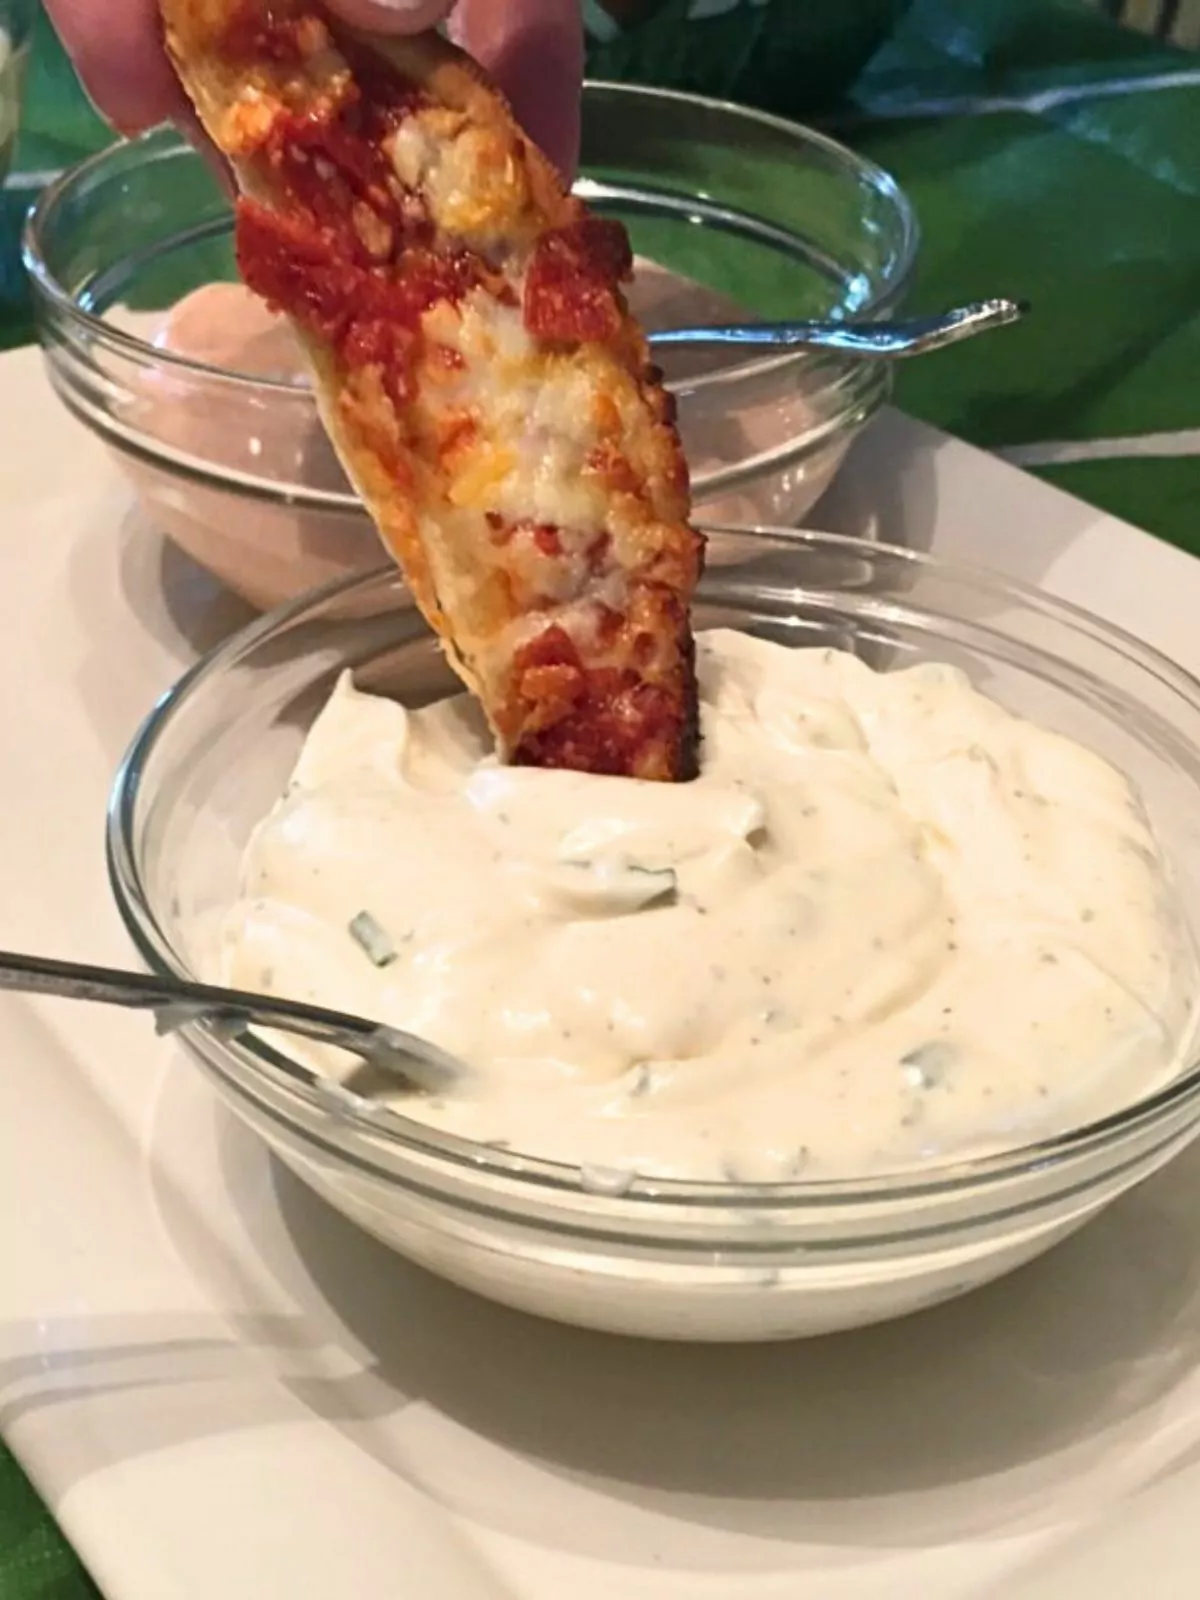 slice of pizza dipping into bowl of ranch dip.